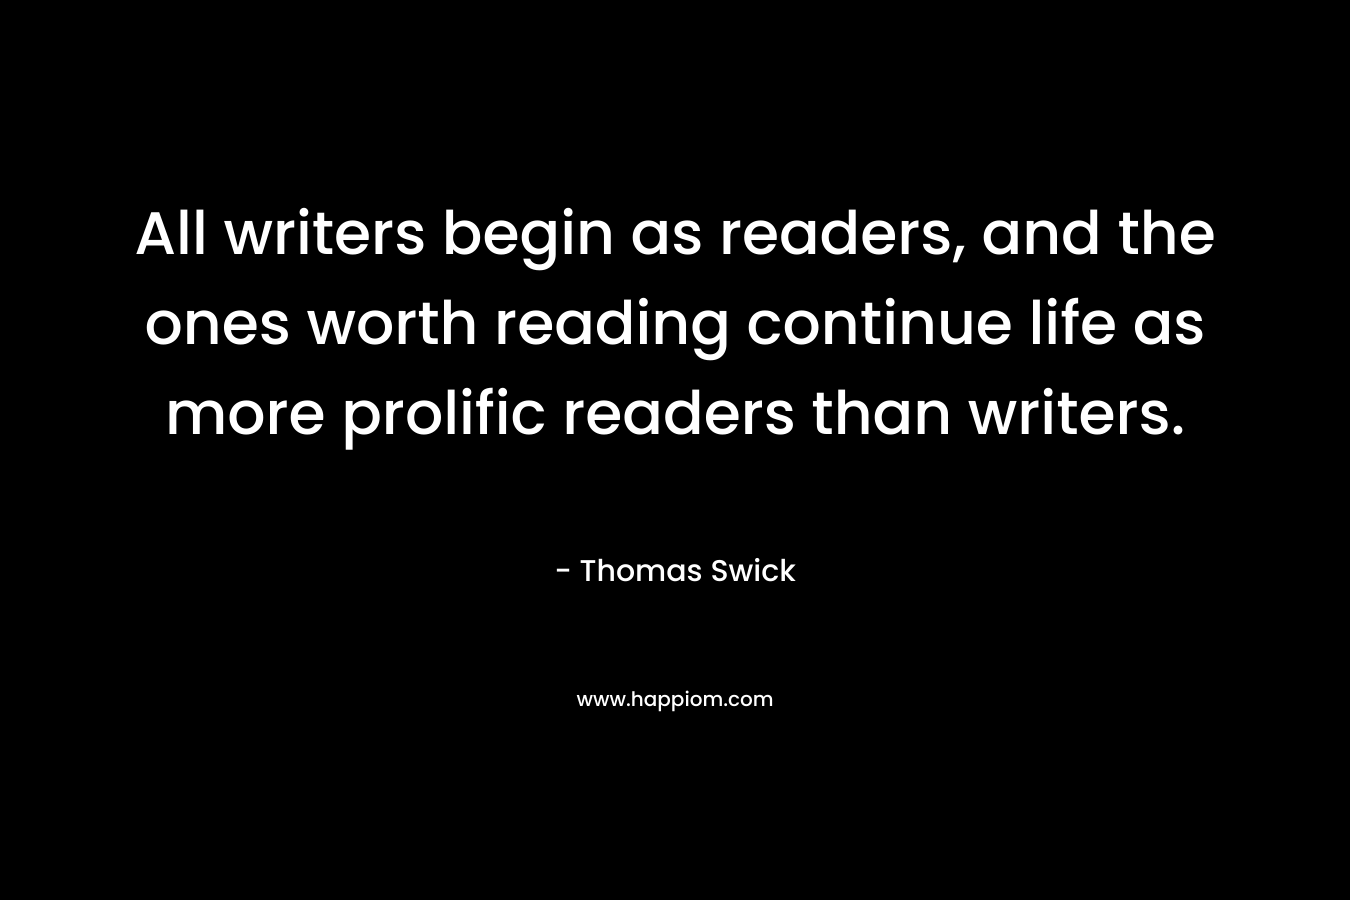 All writers begin as readers, and the ones worth reading continue life as more prolific readers than writers.